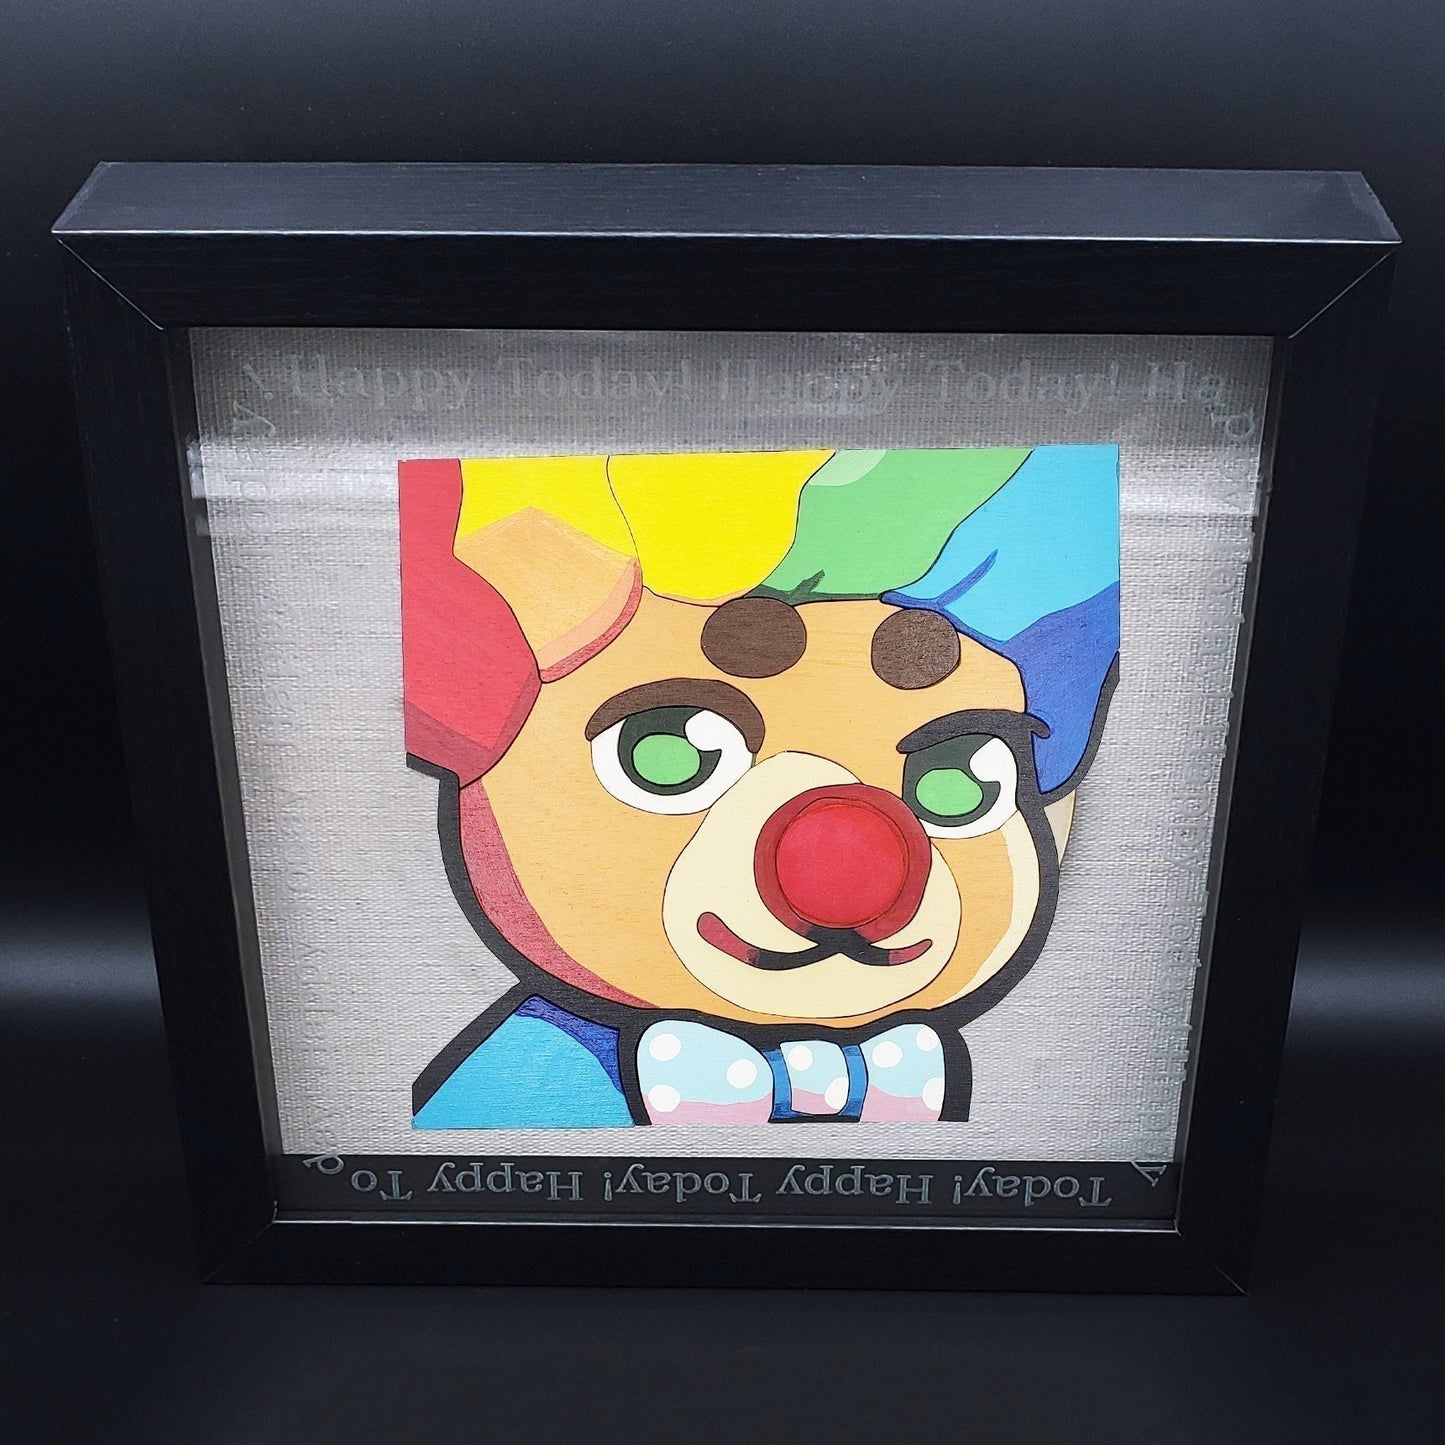 Burr- Replica Emote Wood Art-sleepiFAIL **Permanent Collection** (Streamer Purchase)